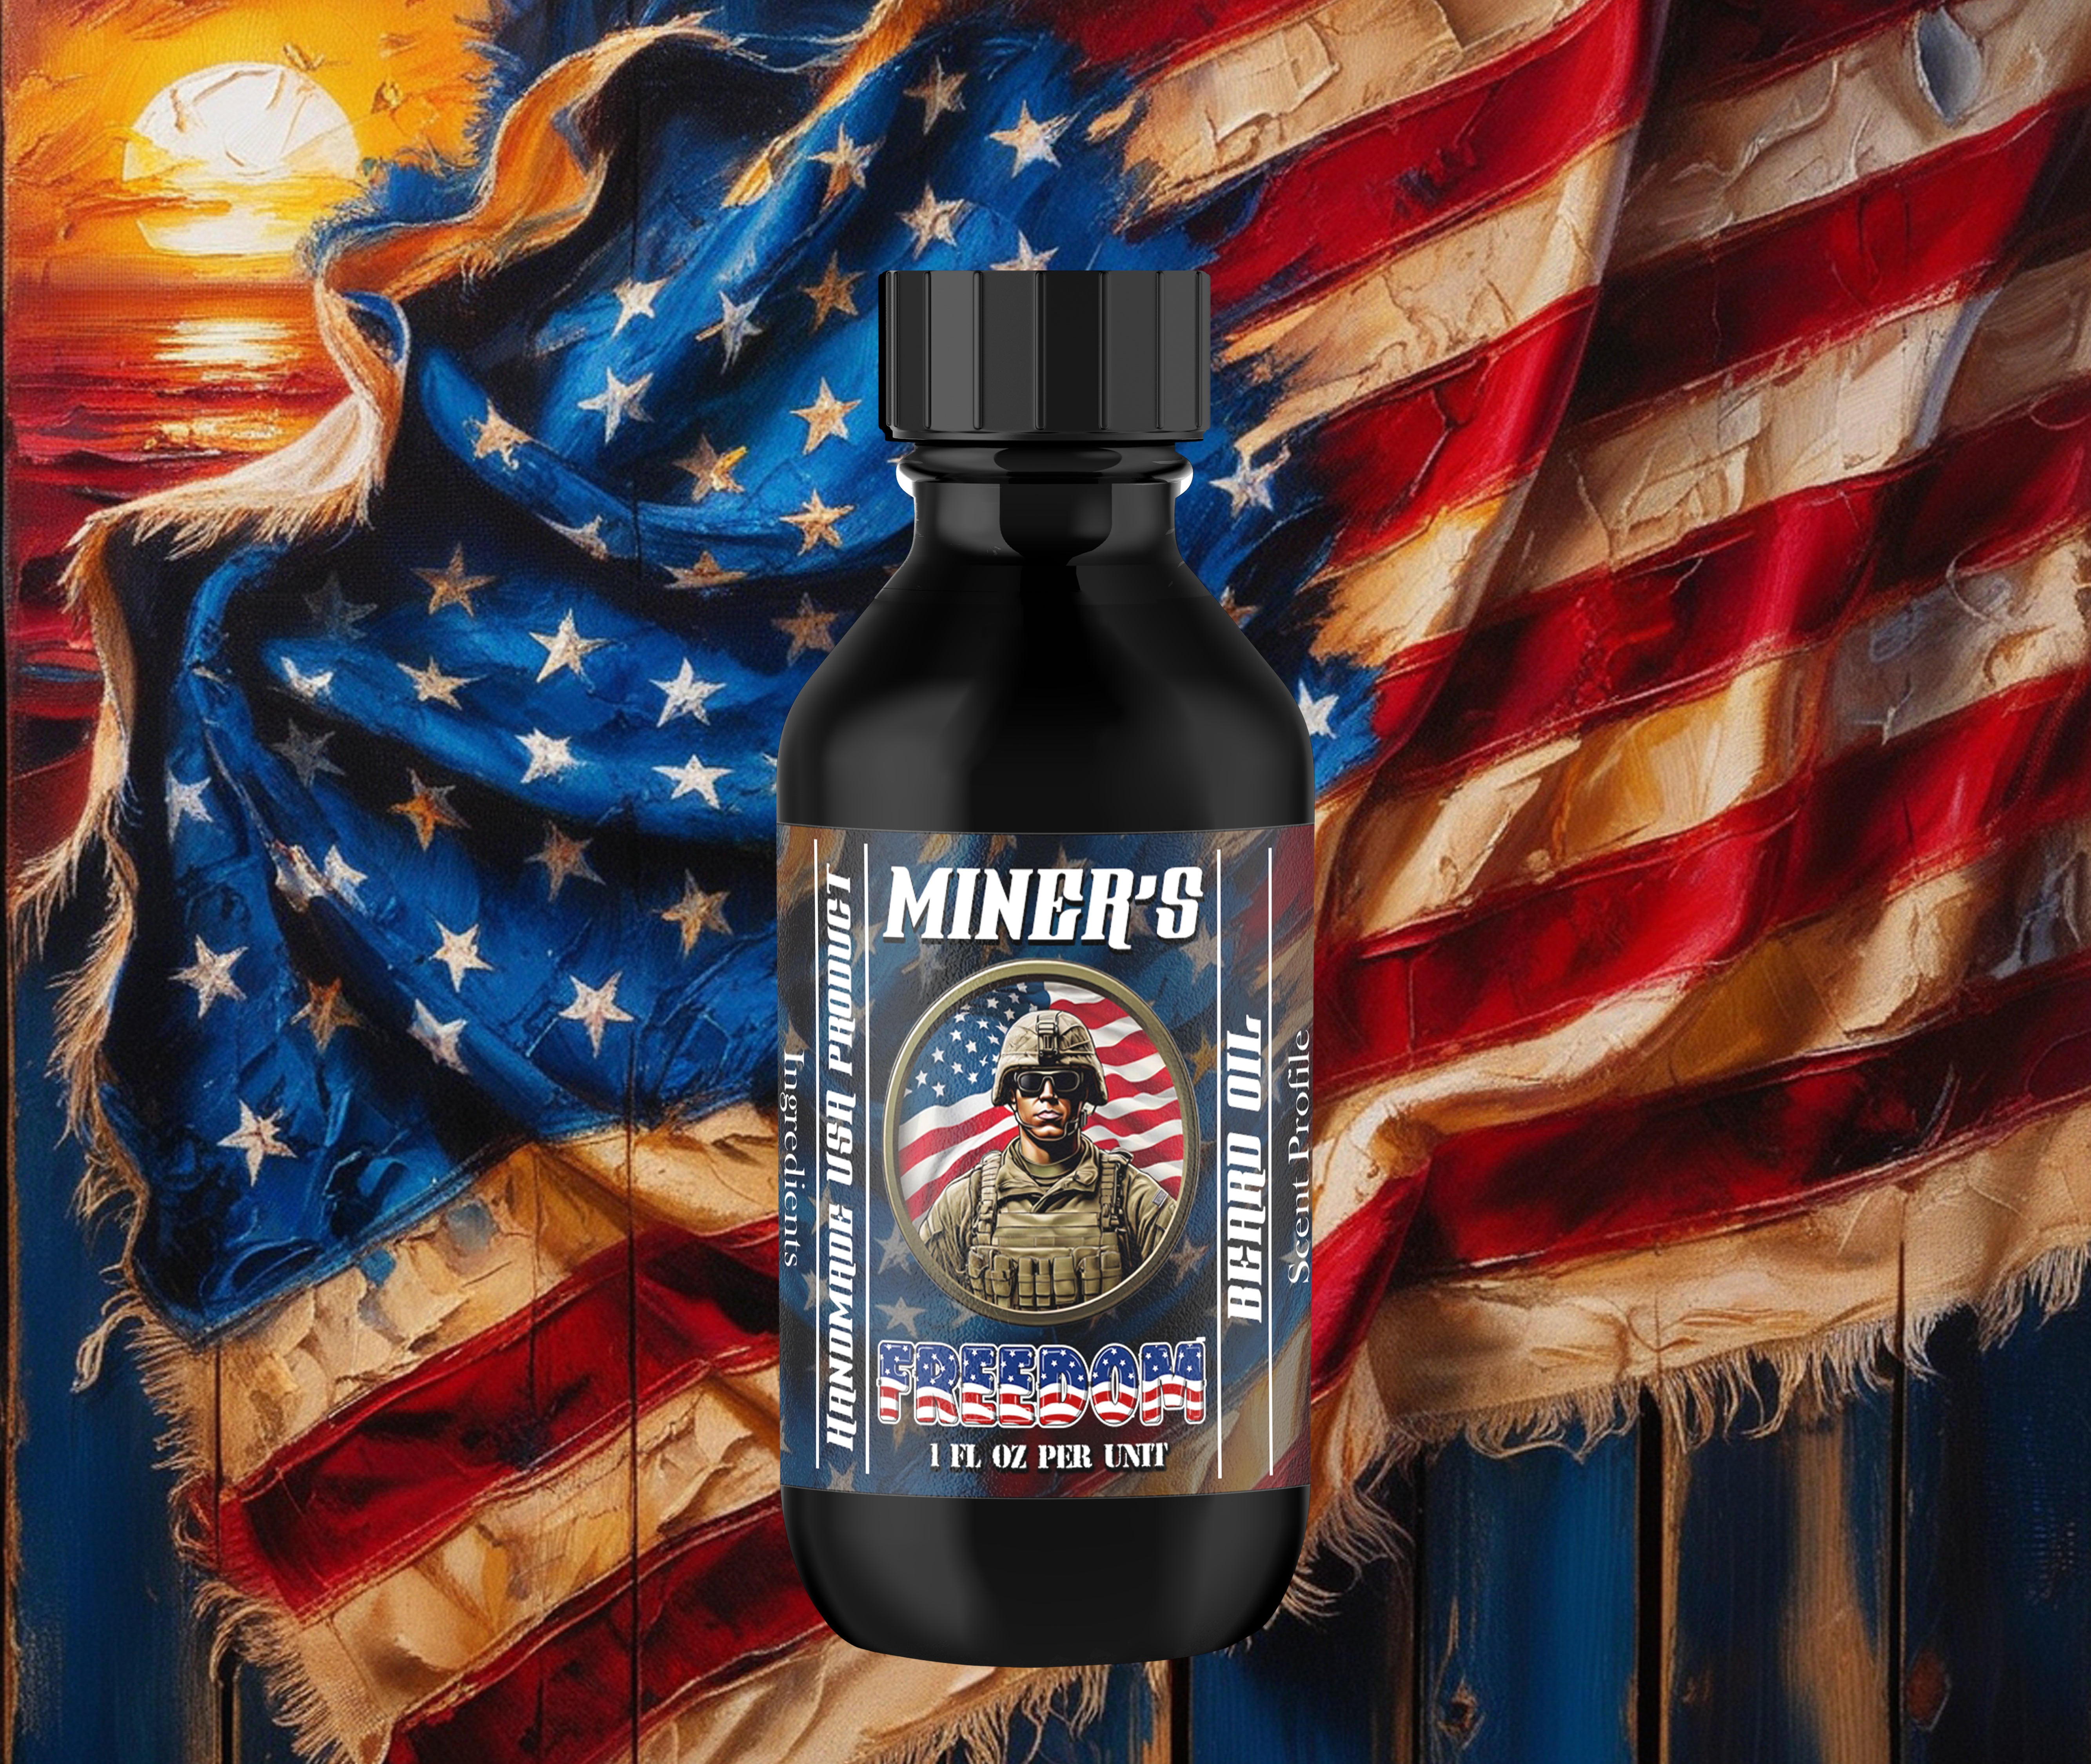 Miner's Independence Day Limited Edition Beard Oil.